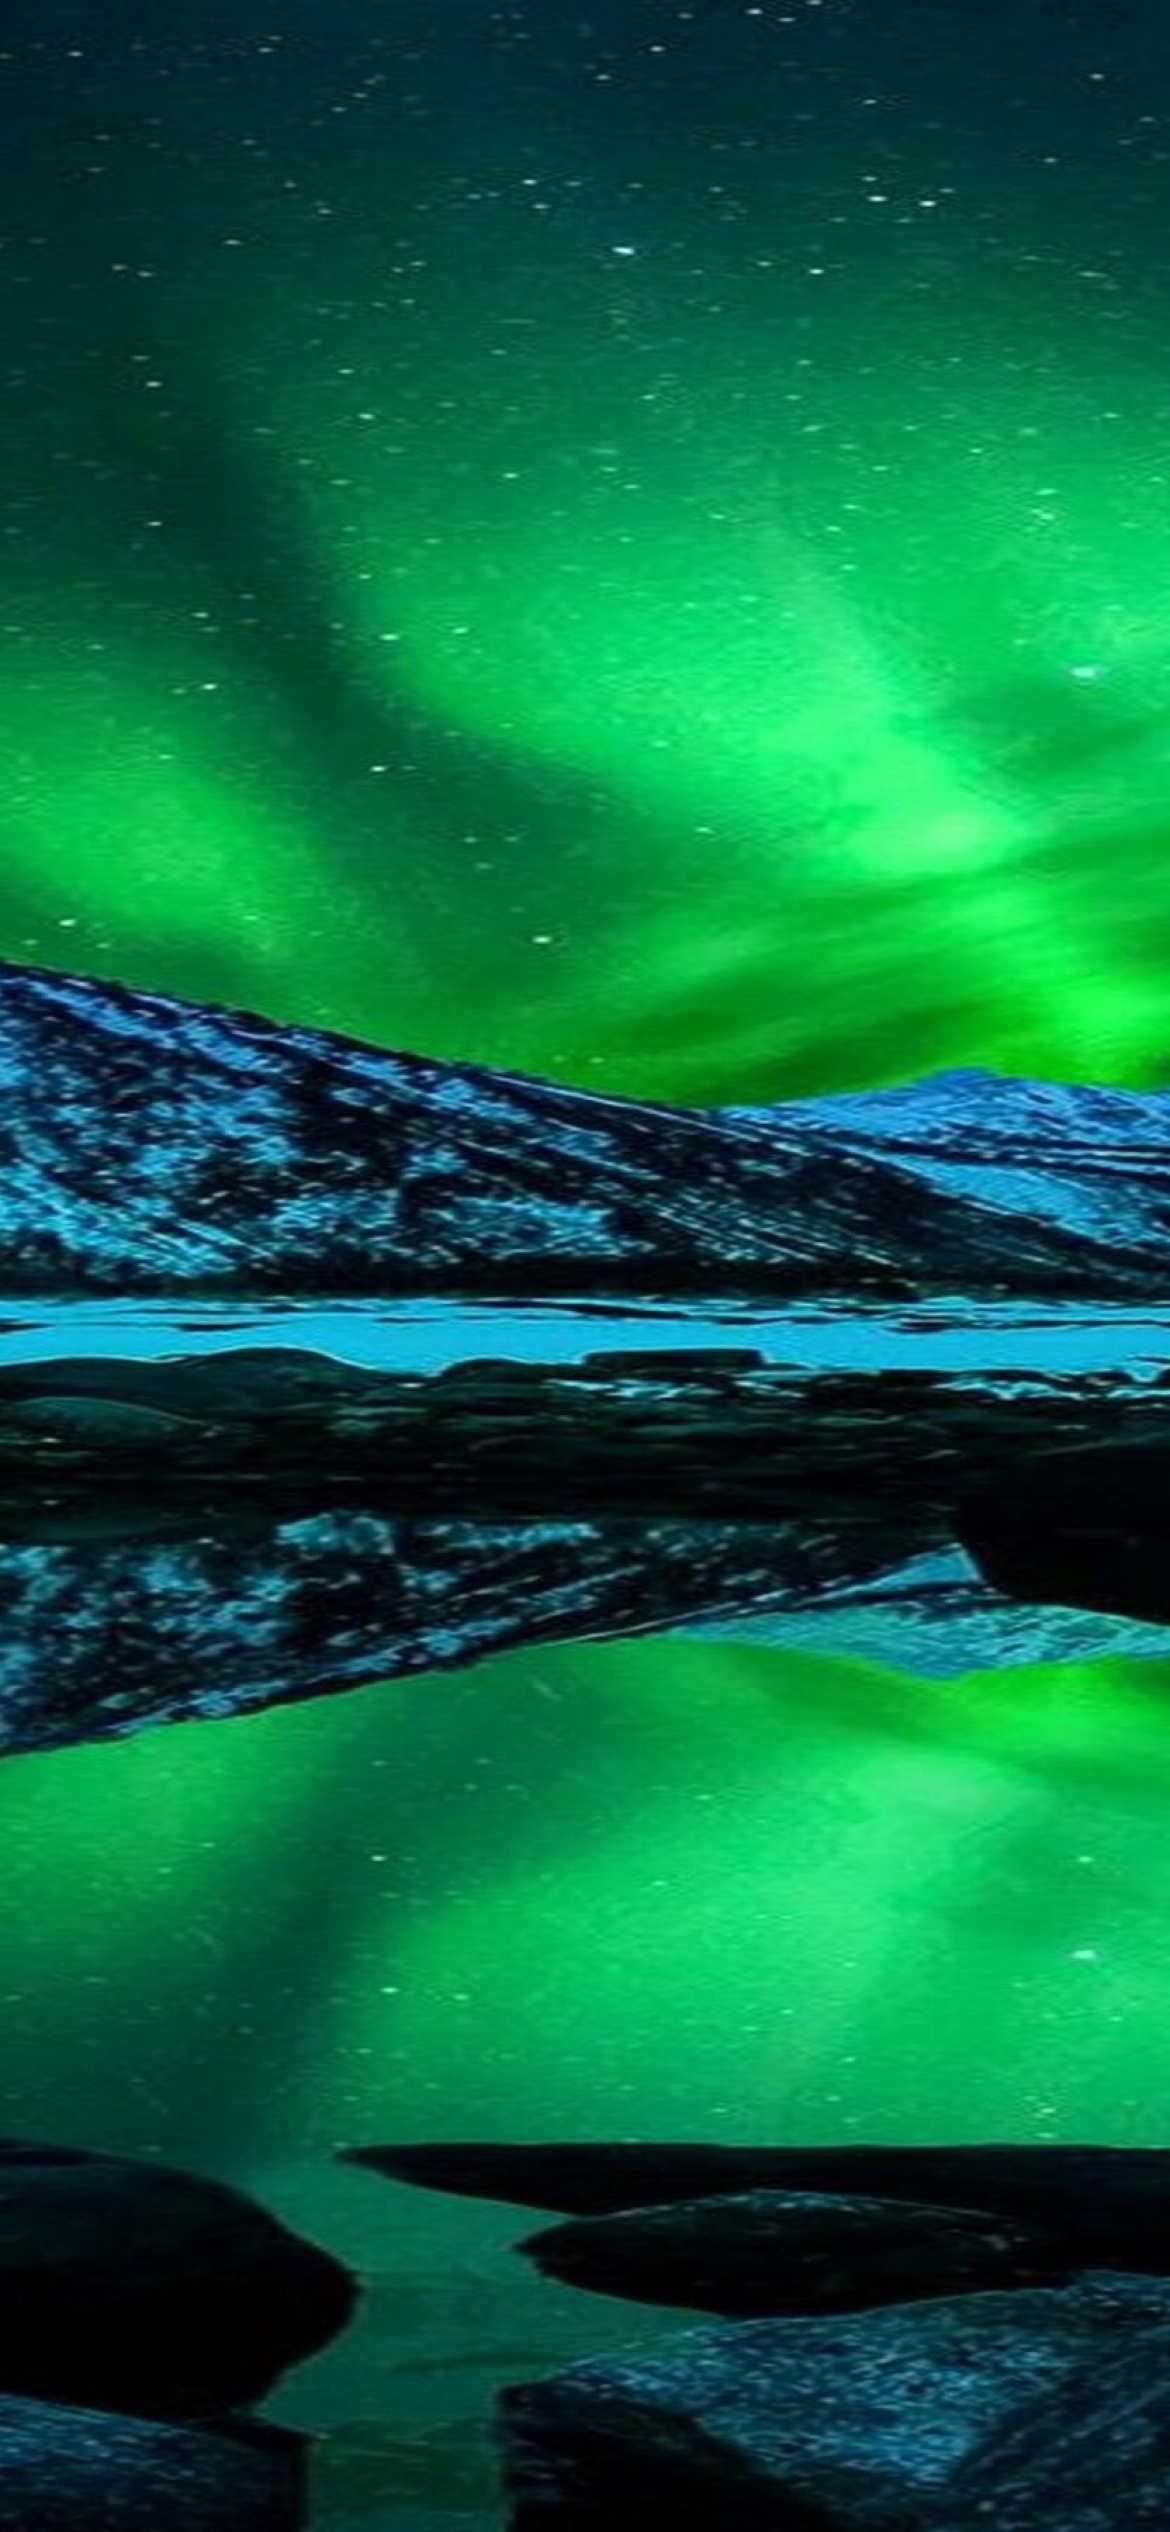 Northern lights view of lake and snowy mountains 2K wallpaper download